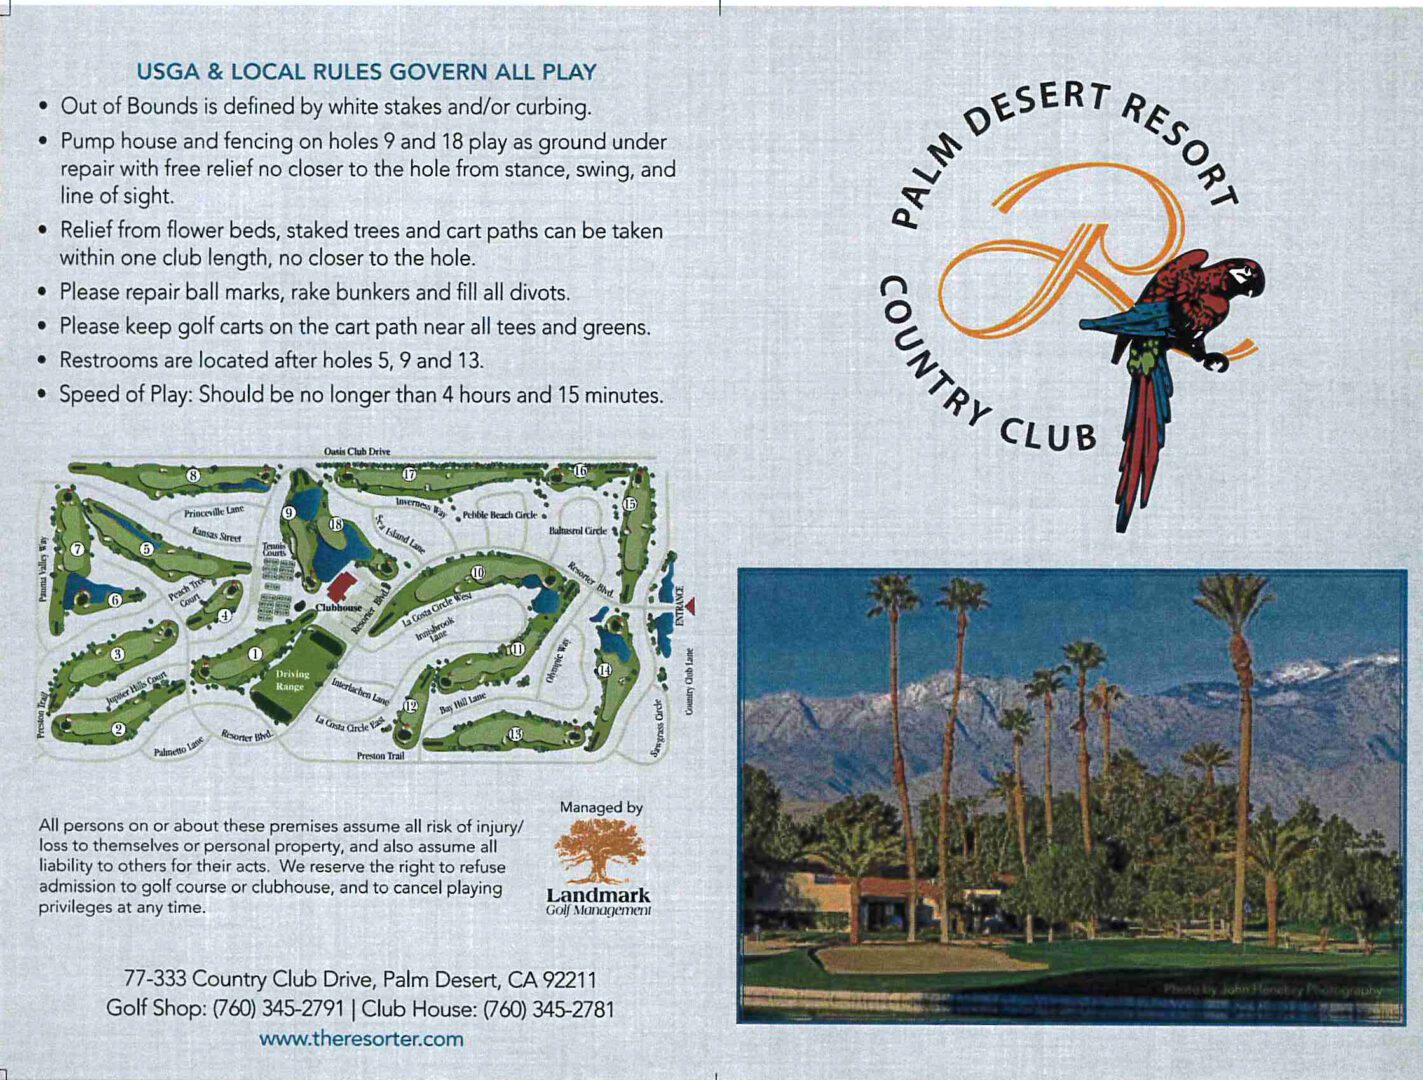 A brochure with palm desert resort country club logo.